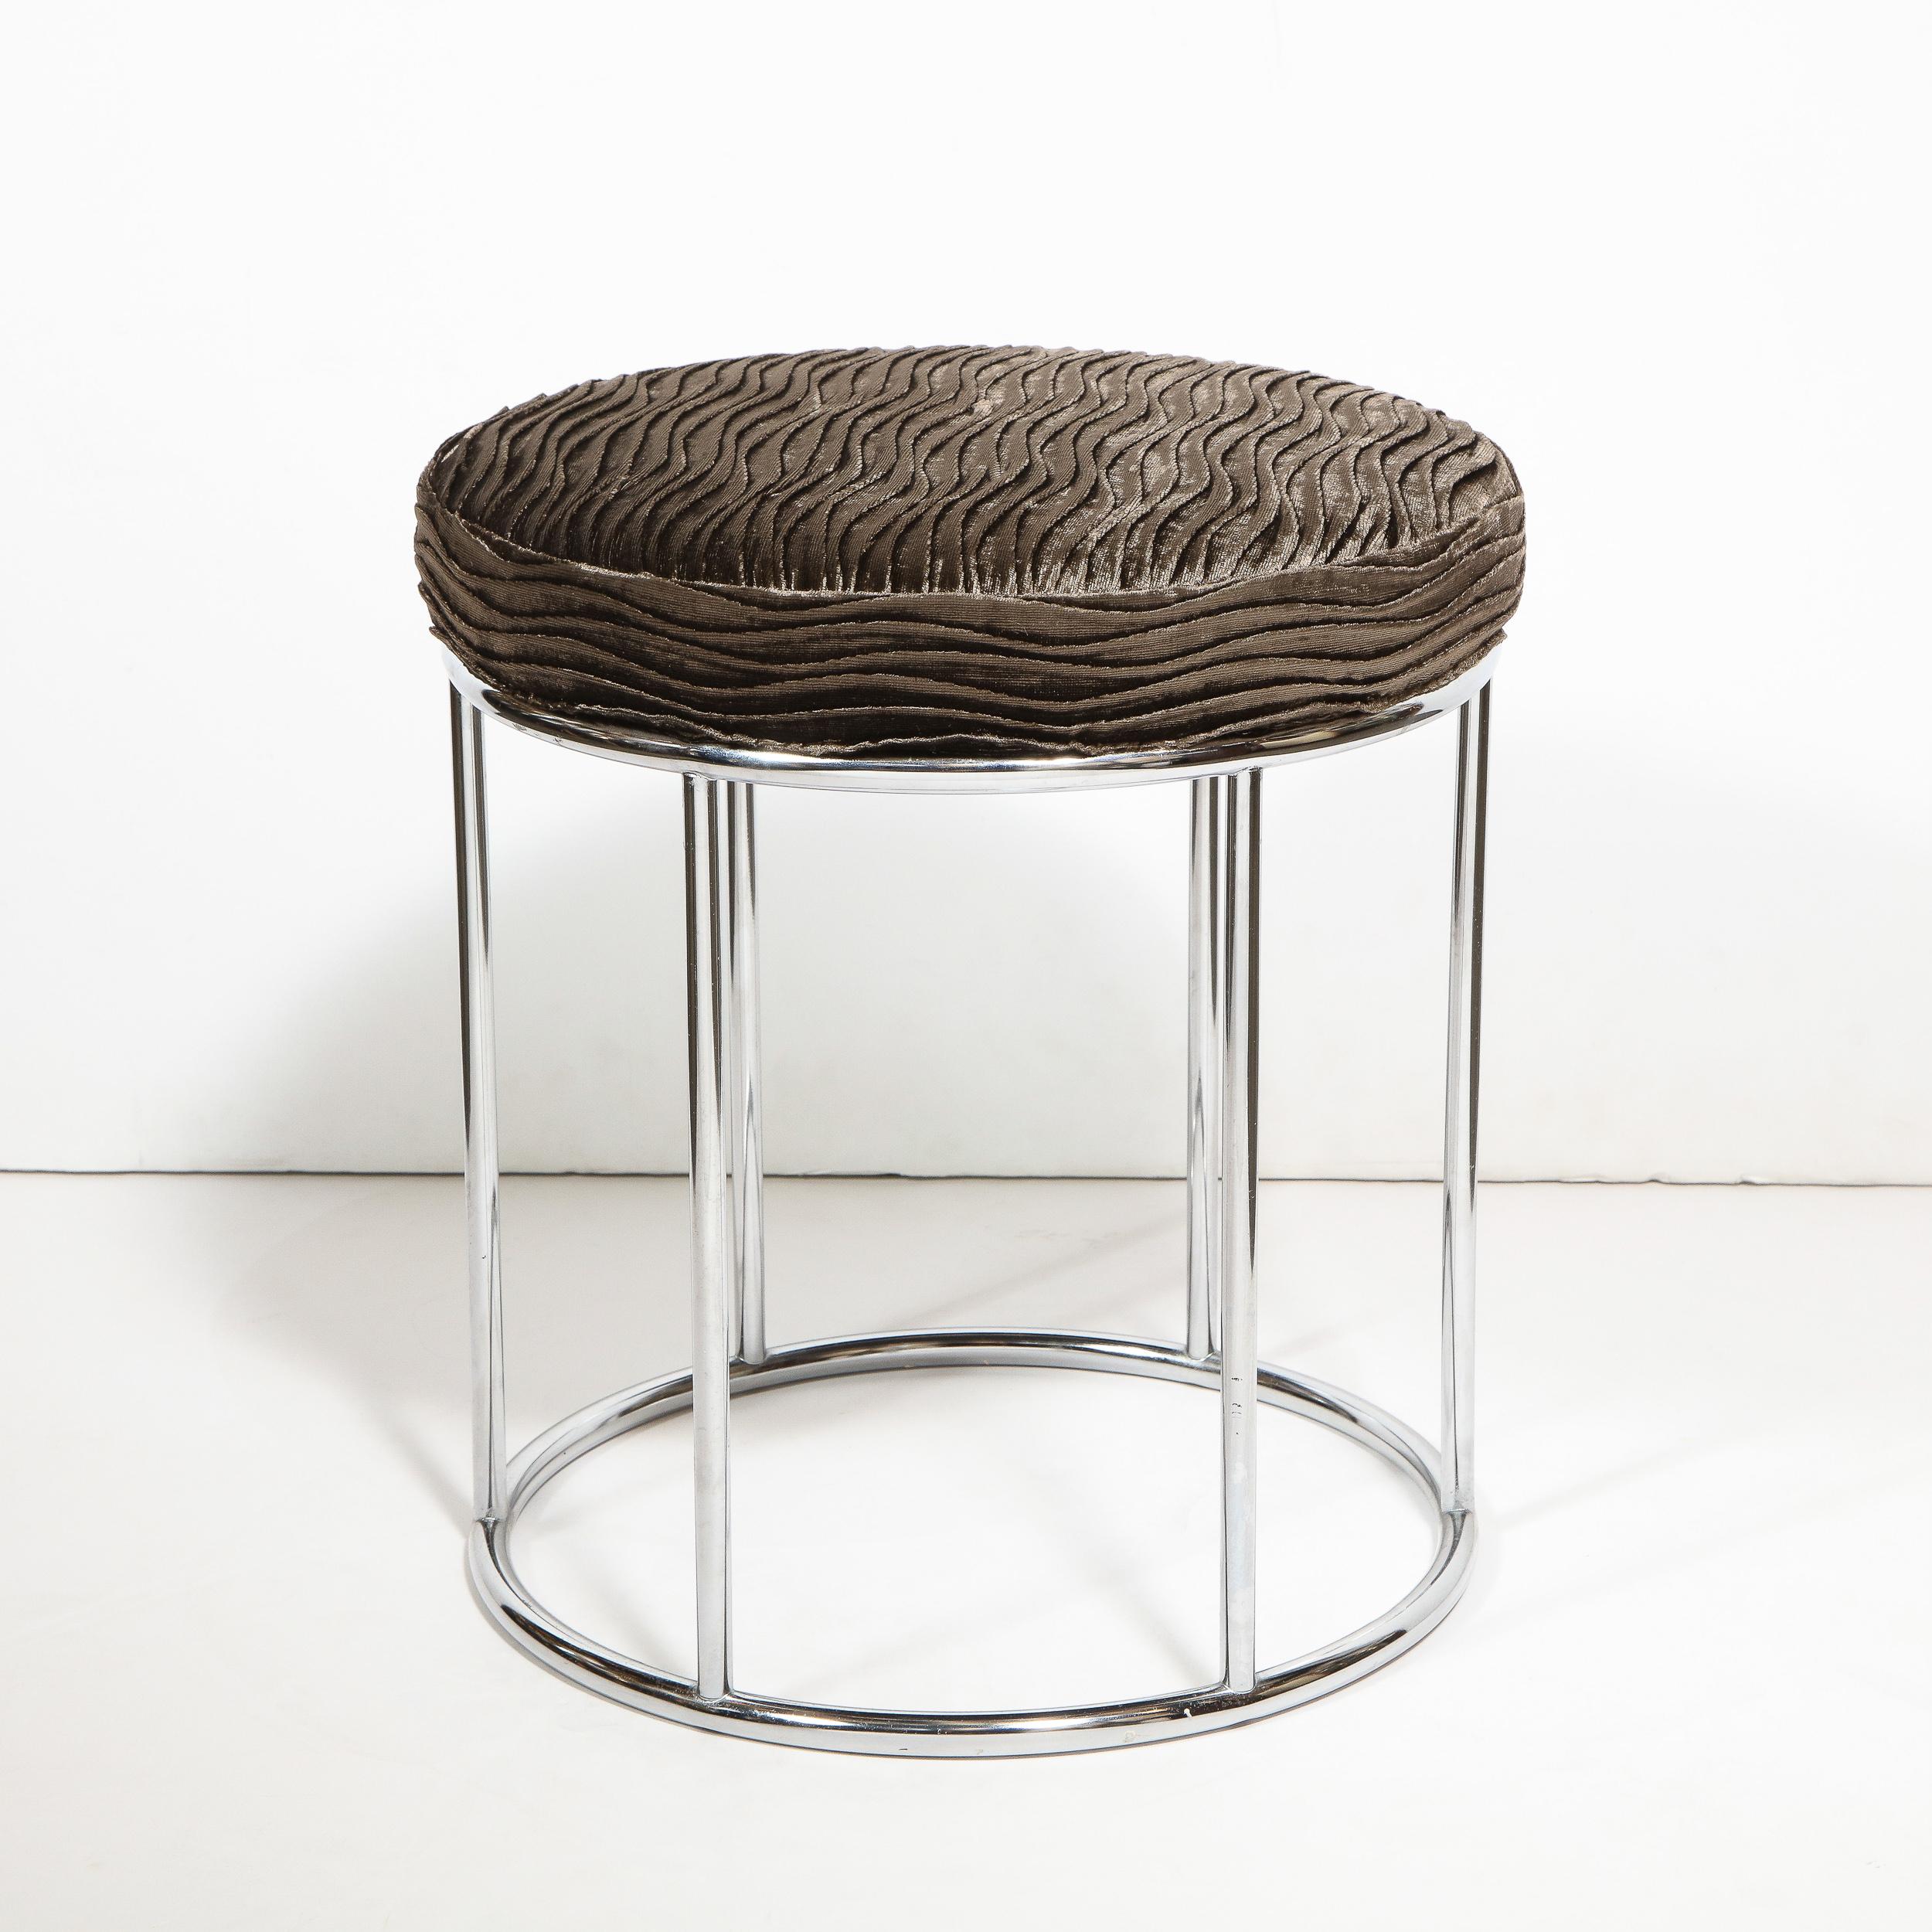 This stunning pair of stool was realized by the esteemed American designer Arthur Umanoff in the United States, circa 1960. It features circular polished chrome frames with six vertical cylindrical supports in the same material. It has been newly